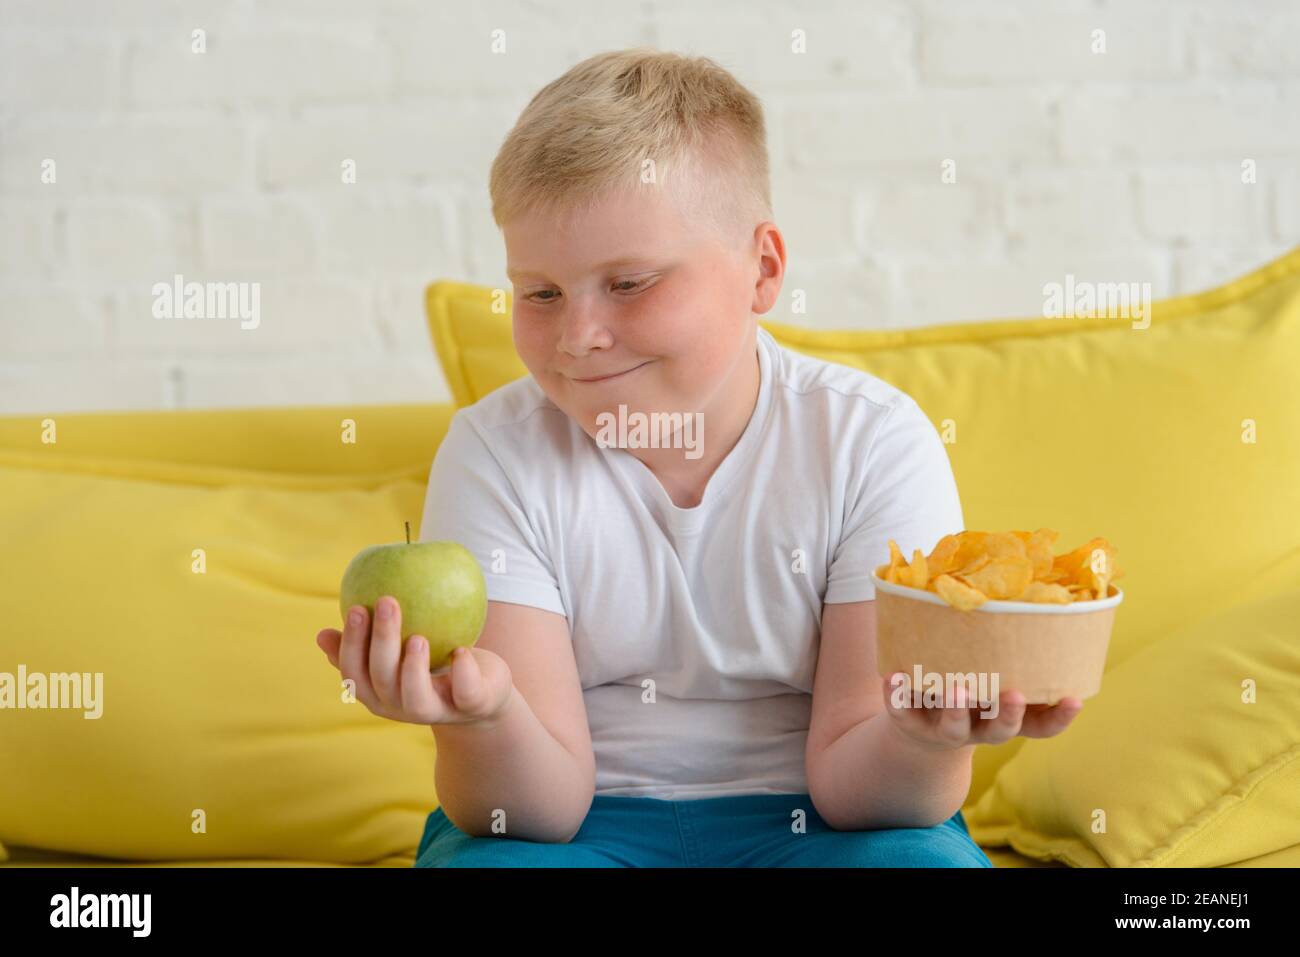 Happy fat boy looking at an apple and holding a cup of chips Stock Photo